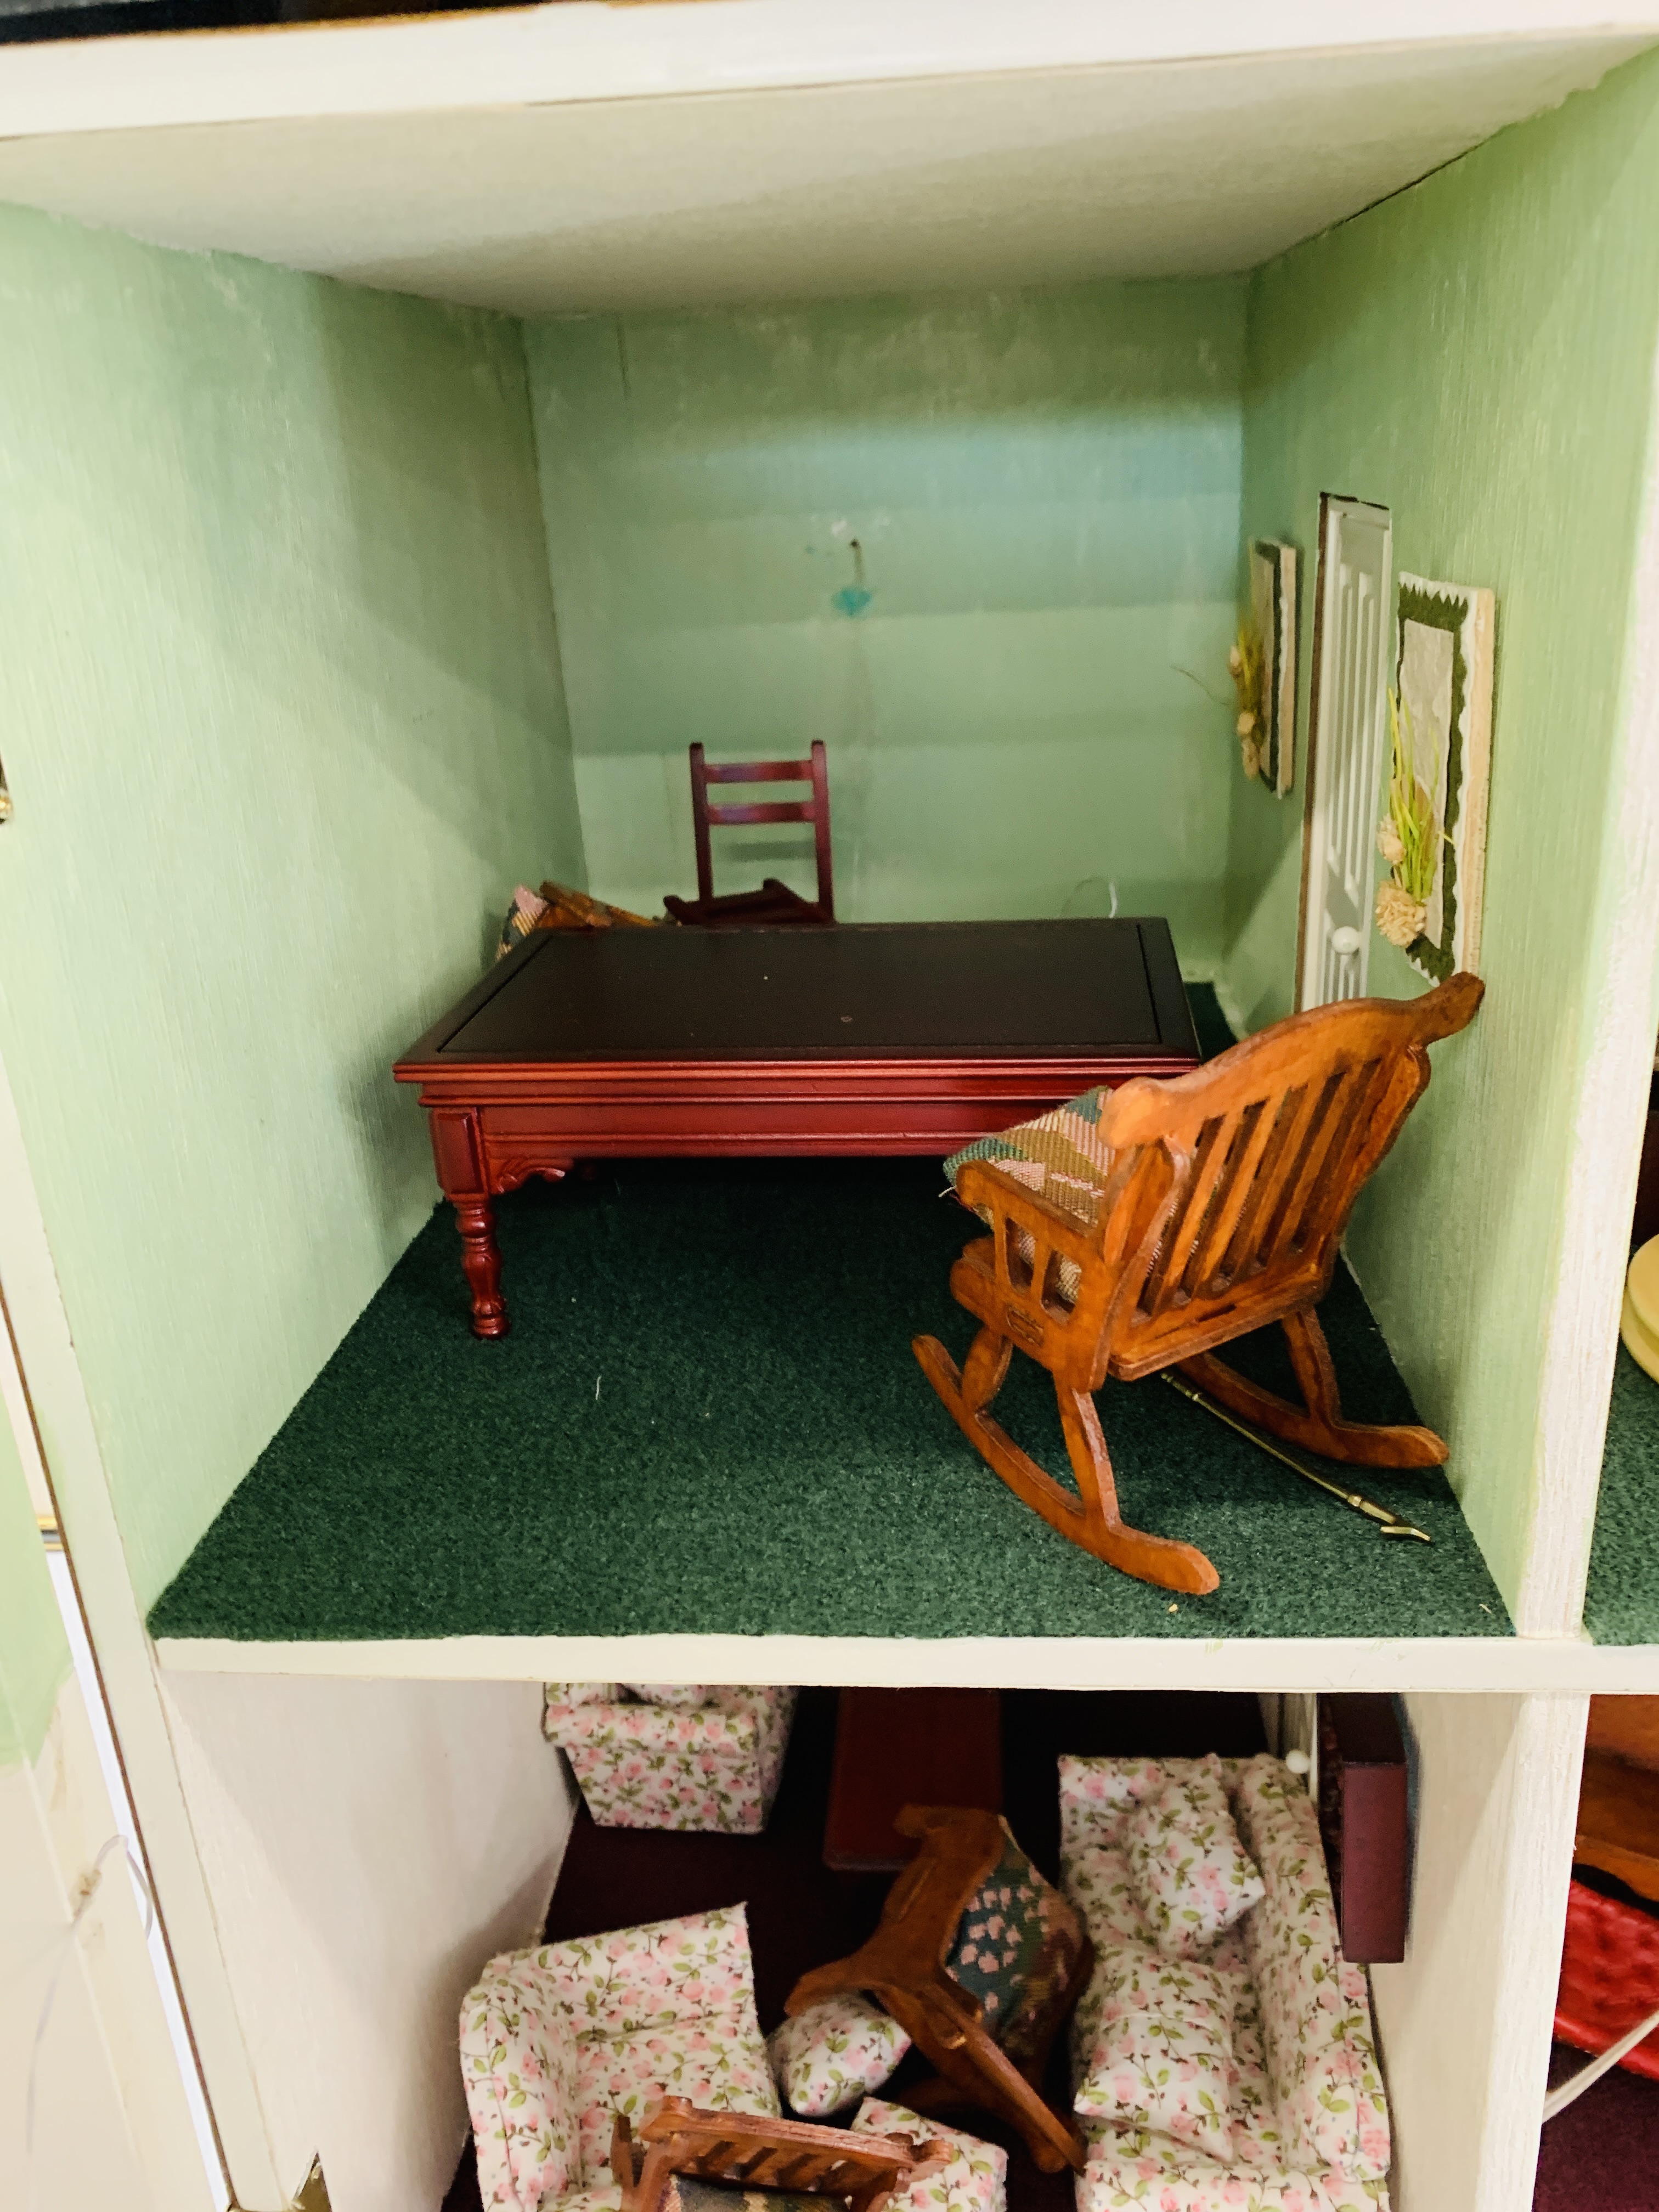 THREE STOREY DOLLS HOUSE ALONG WITH VARIOUS MINIATURE DOLLS HOUSE FURNITURE H 69CM, W 59CM, D 42CM. - Image 9 of 12